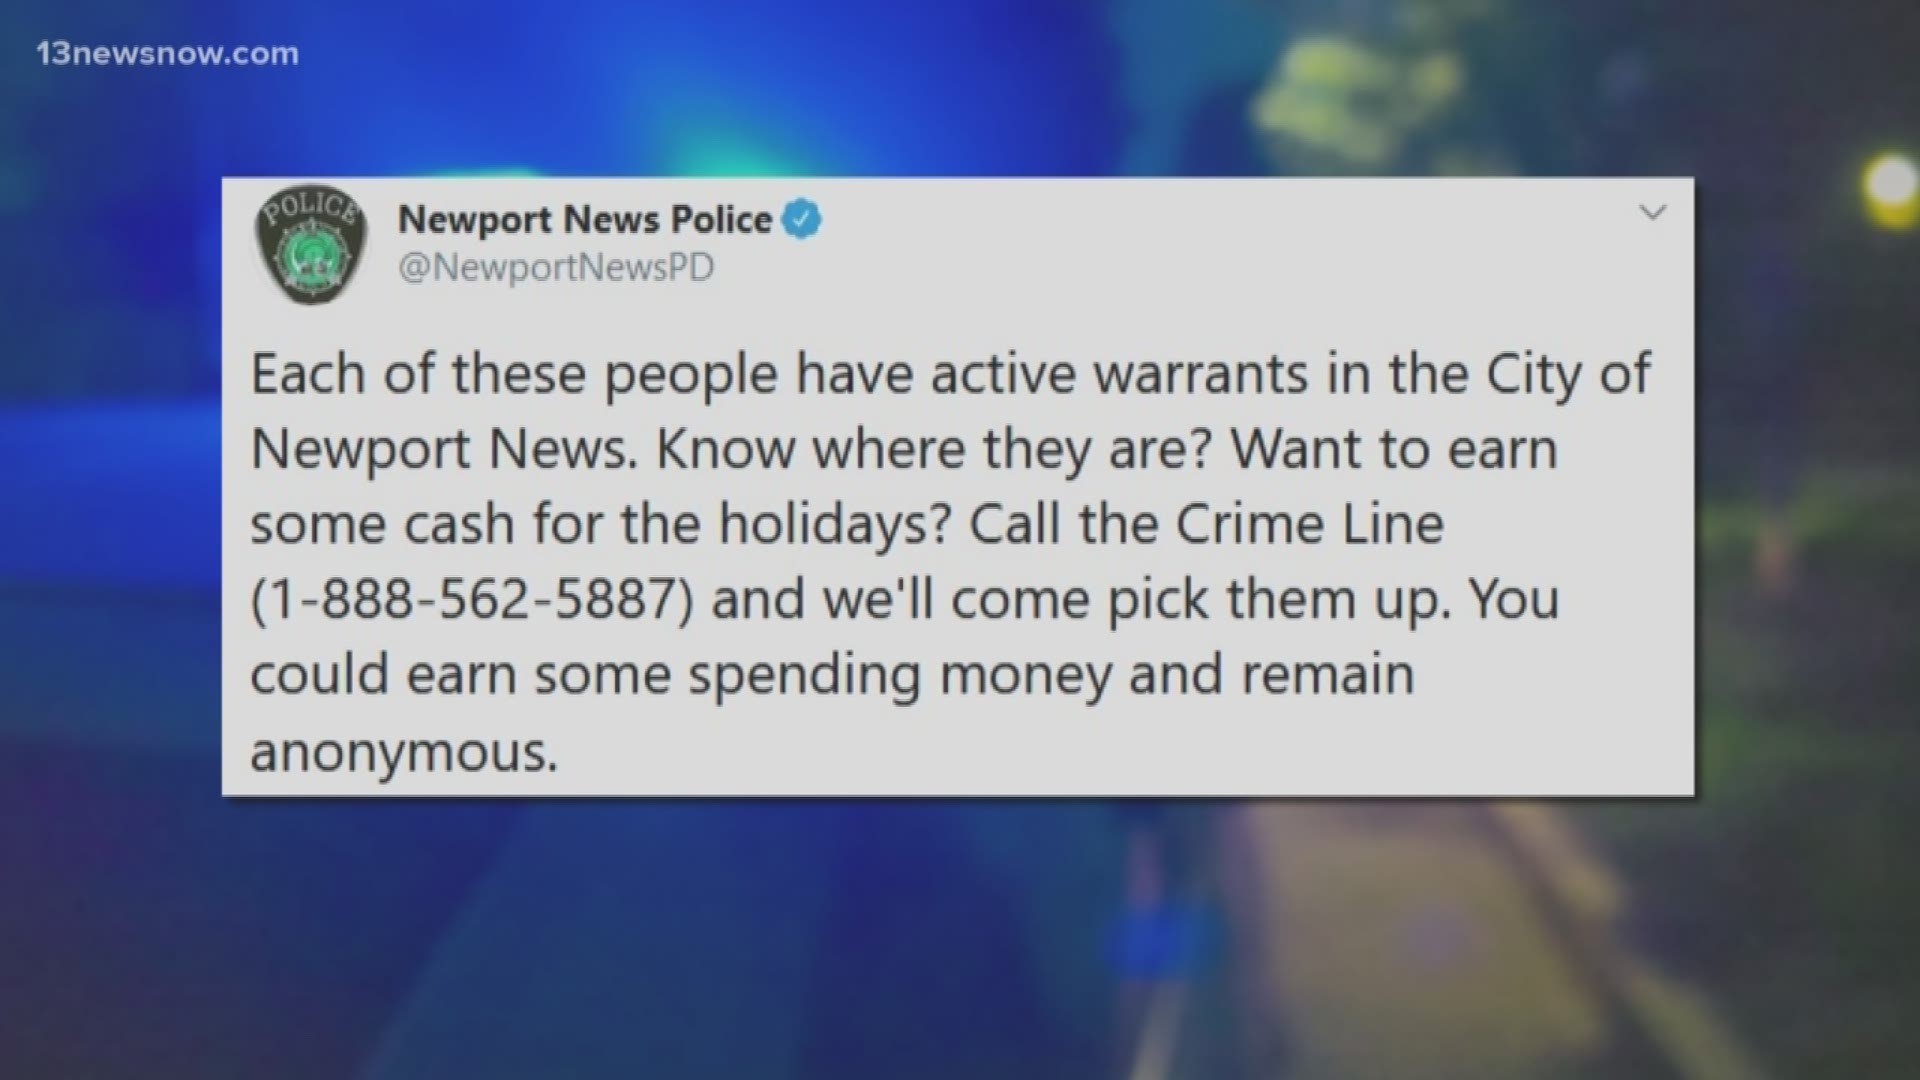 The Newport News police hope the promise of reward money will get residents to speak up. Police are looking for 18 people with active warrants.